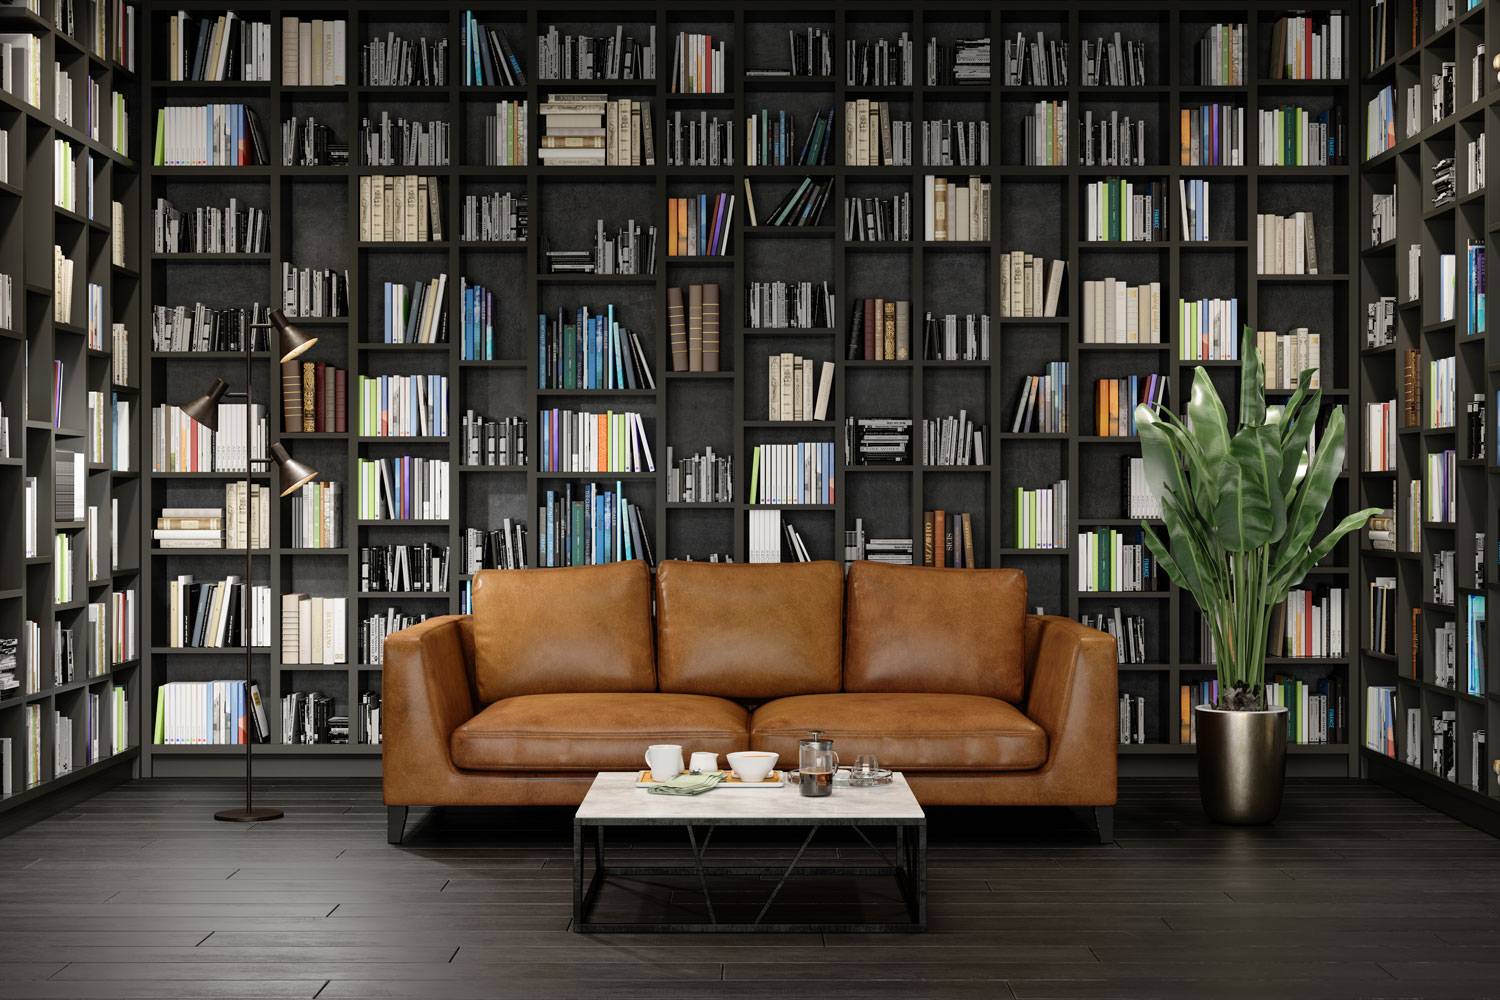 A huge collection of books inside a library with a leather sofa and coffee table